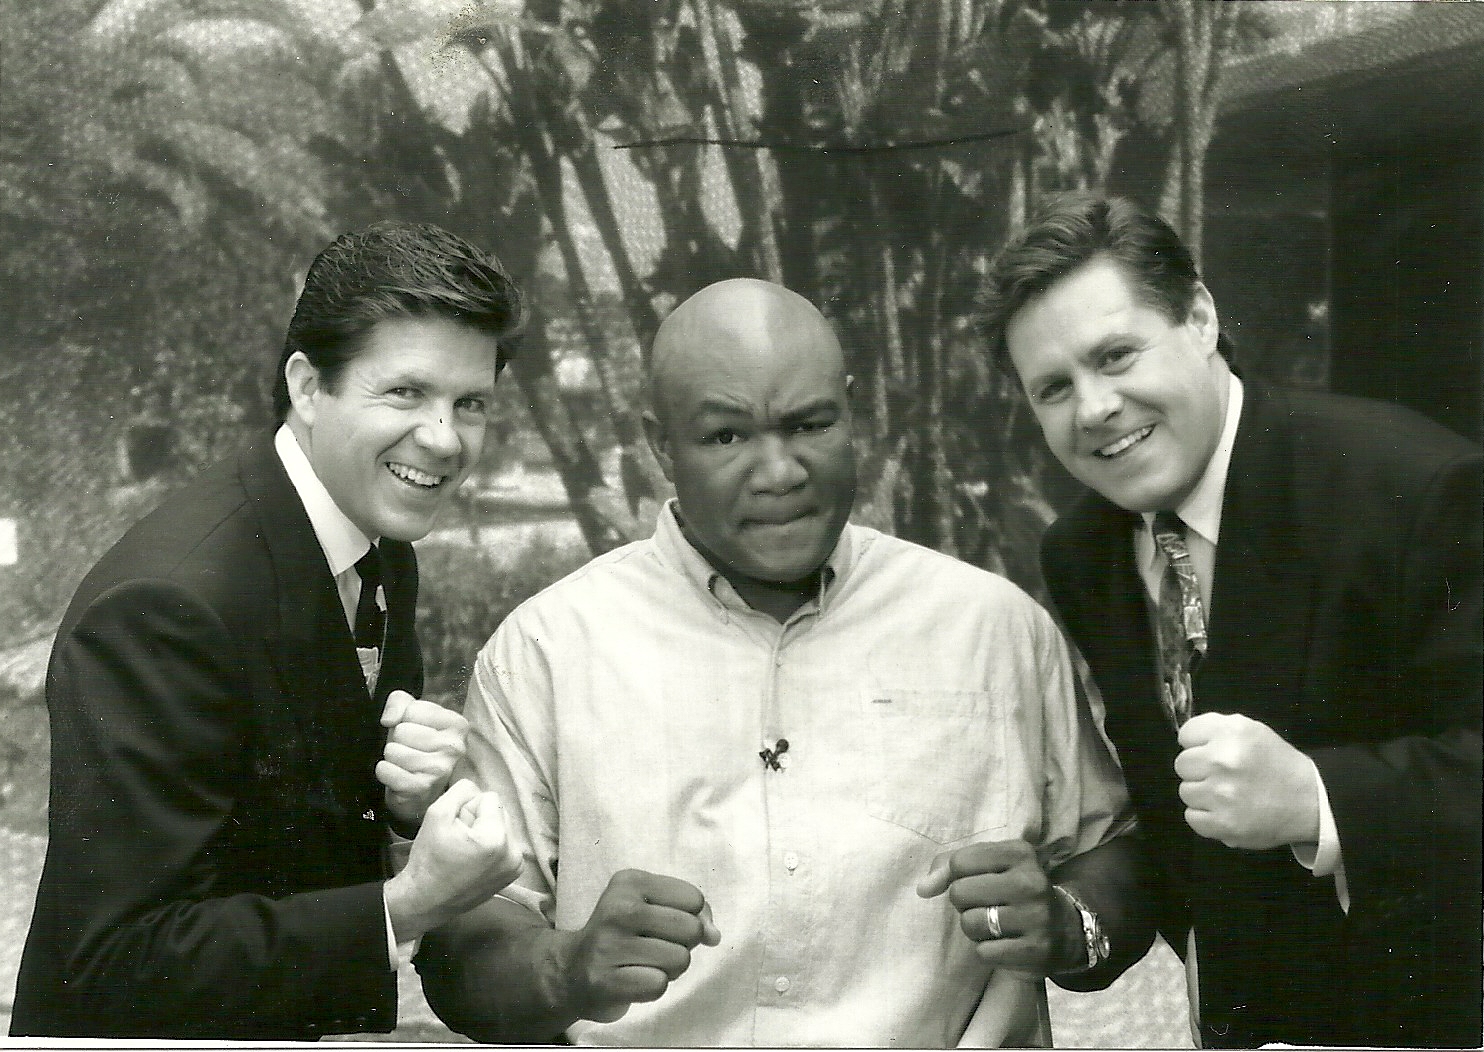 Butch McCain, former Heavyweight Champion George Foreman and Ben McCain posing after interview.